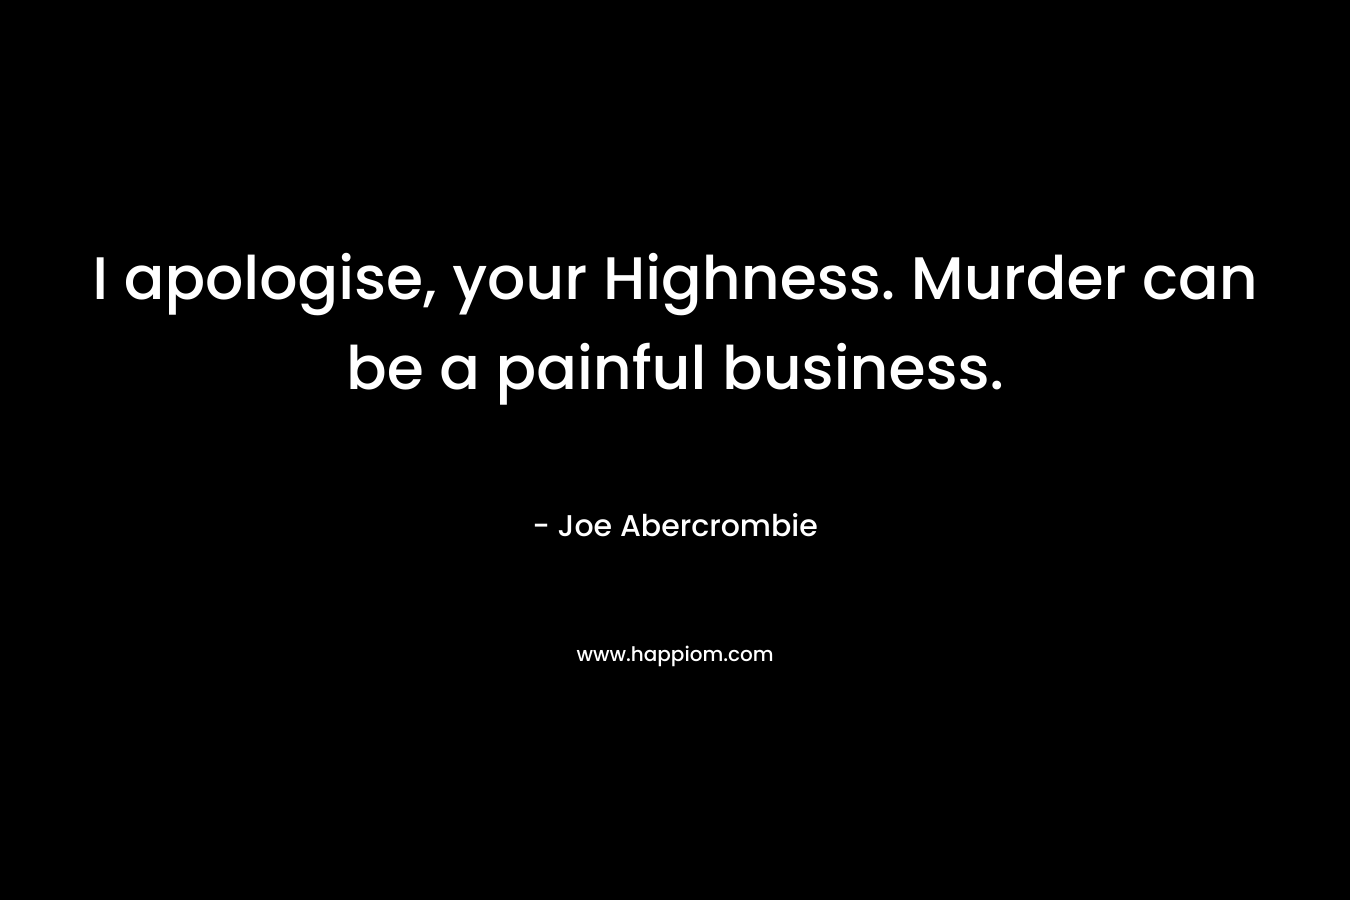 I apologise, your Highness. Murder can be a painful business. – Joe Abercrombie